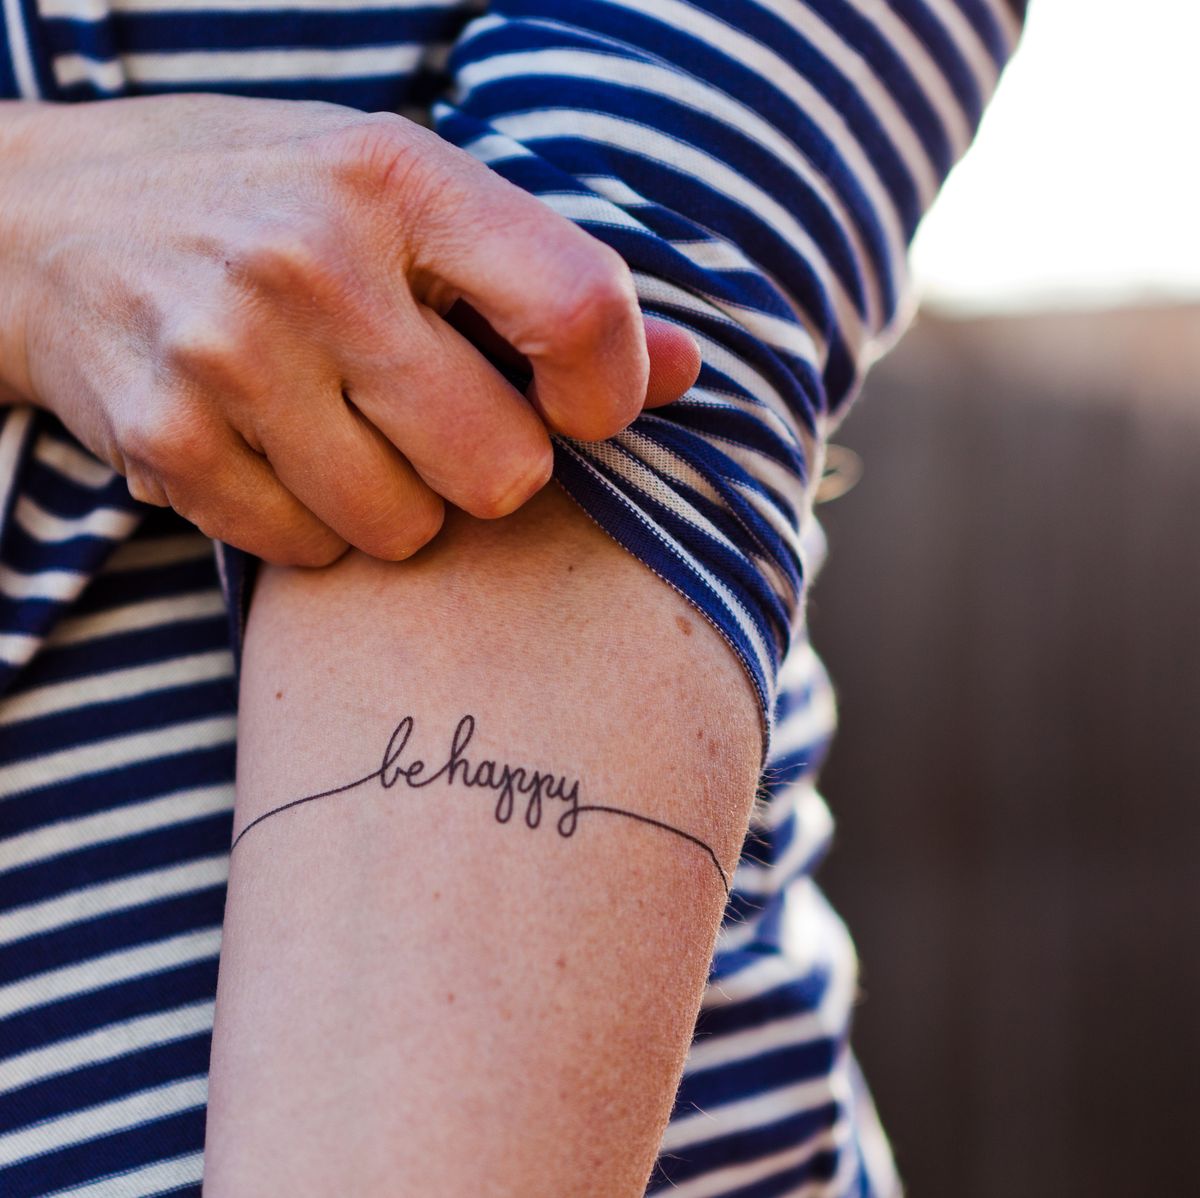 Should I Get A Tattoo? 13 Things To Consider